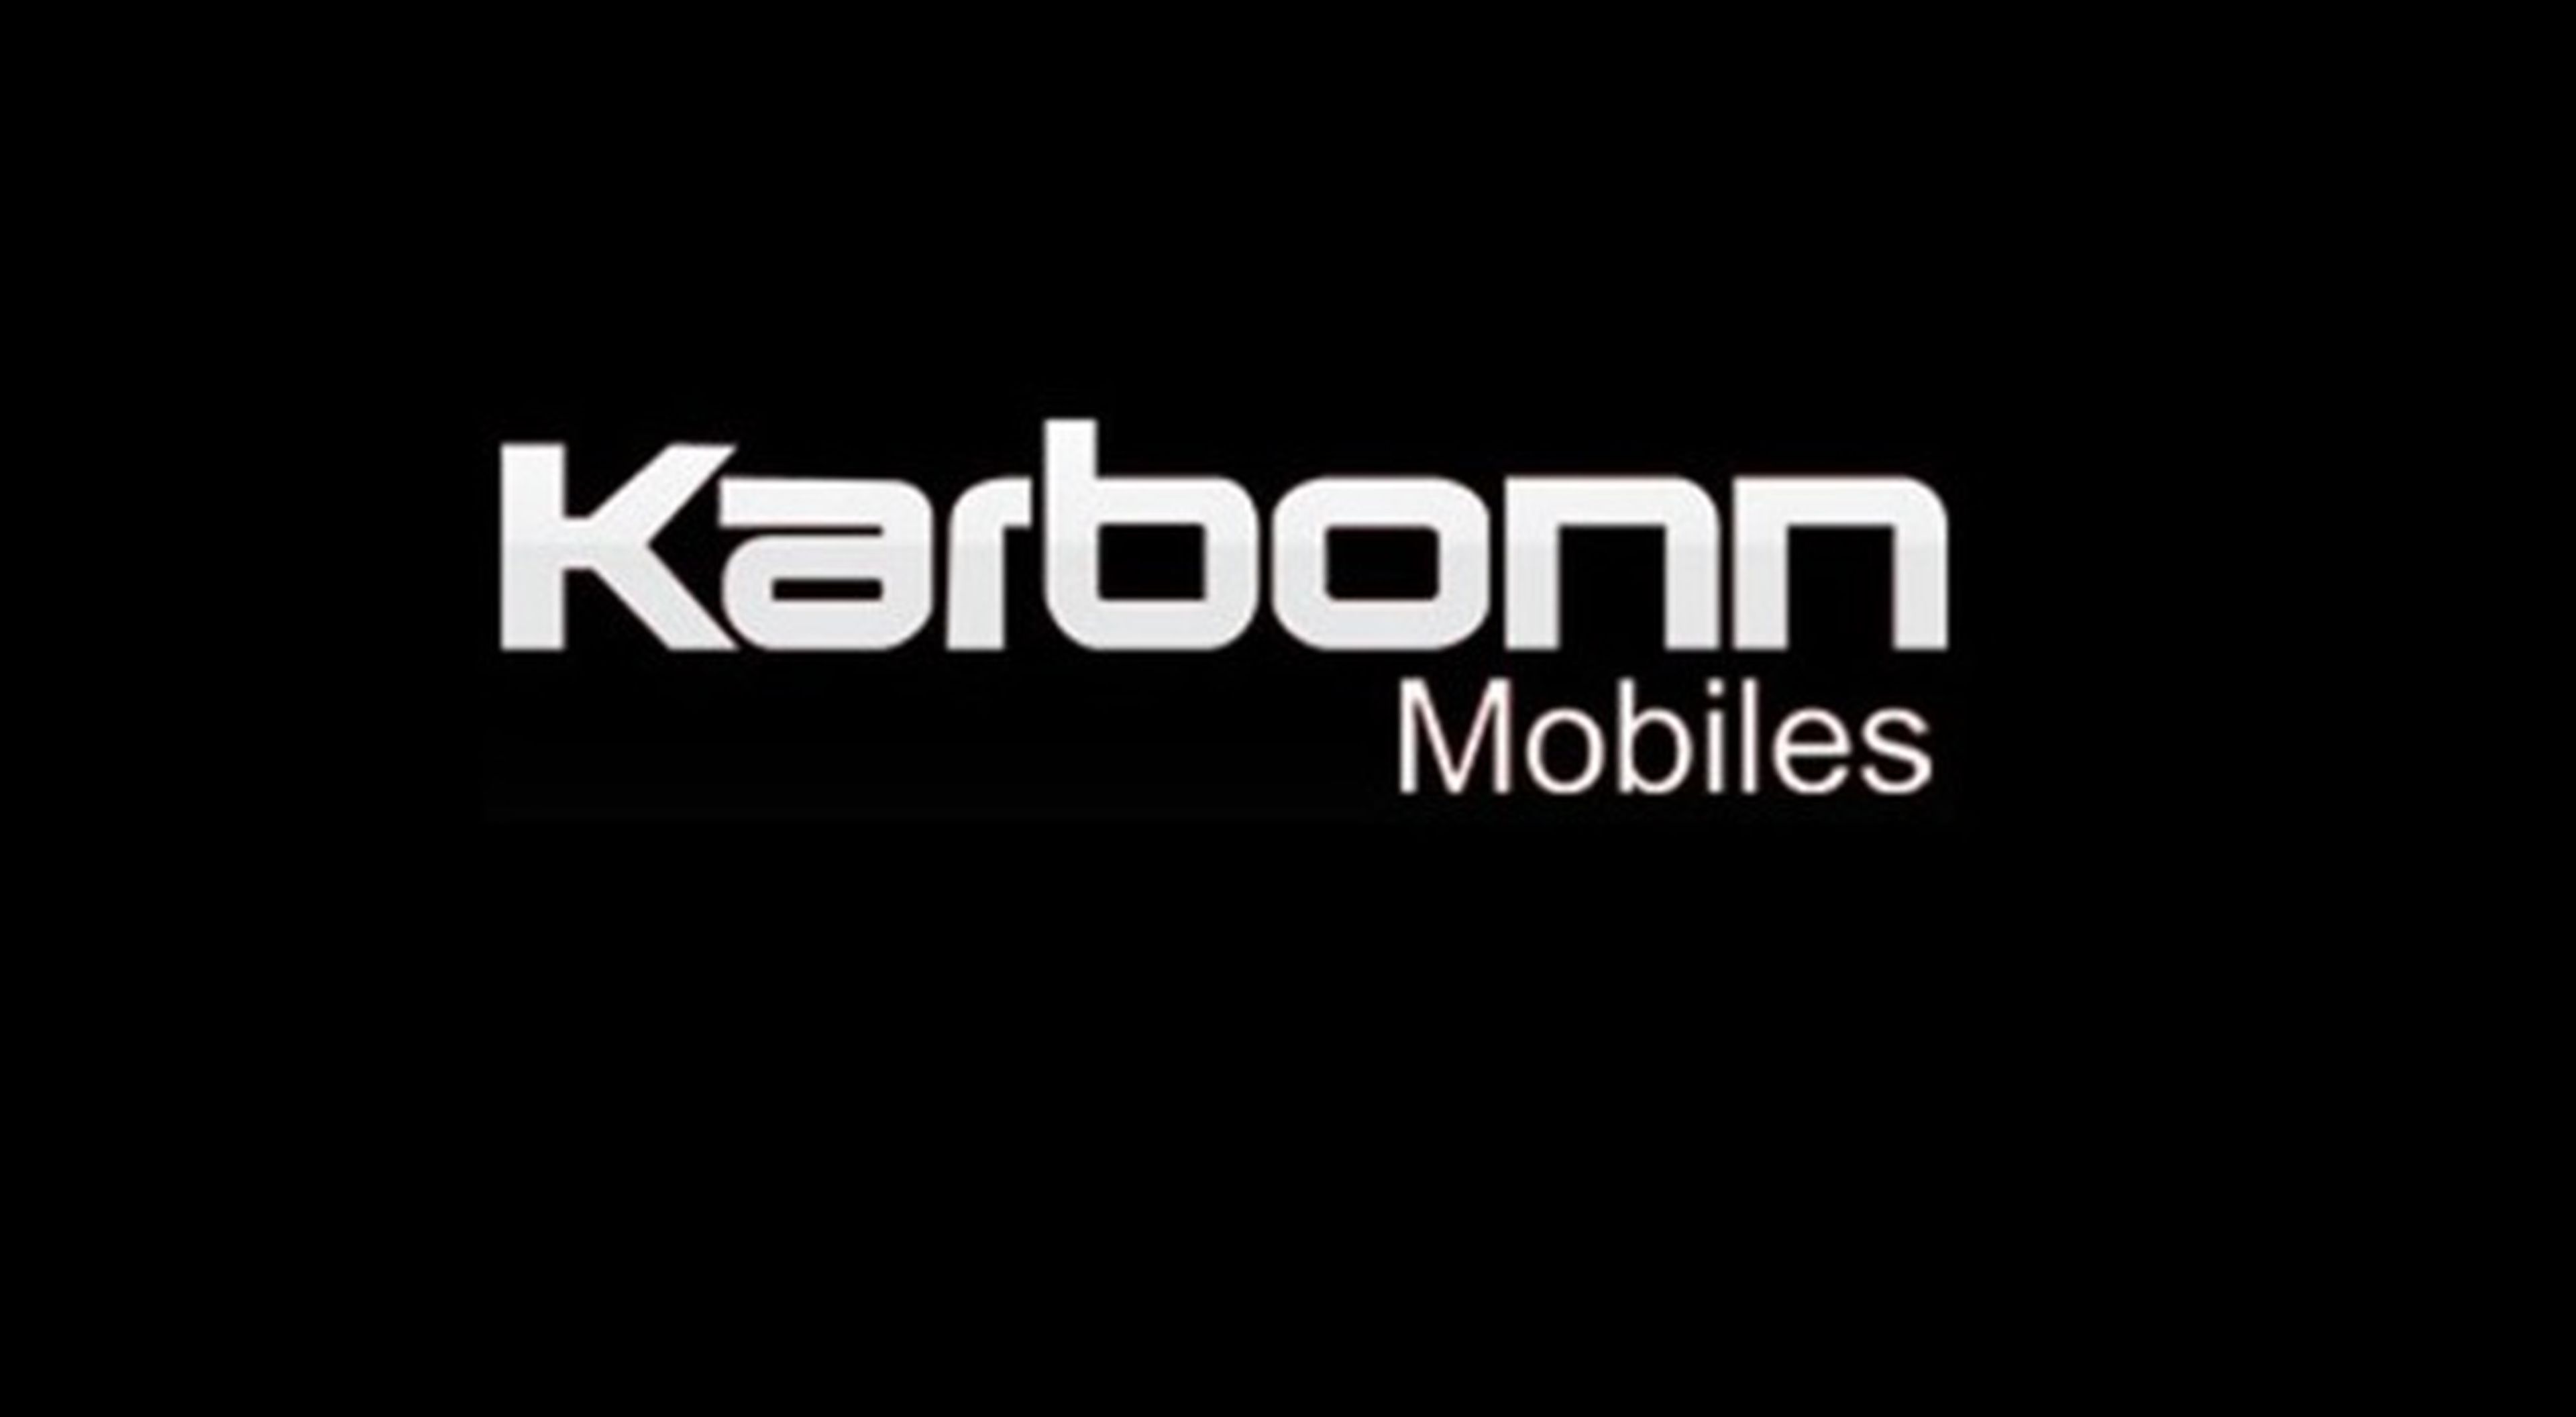 Karbonn Mobiles, dual OS, Android, Windows Phone